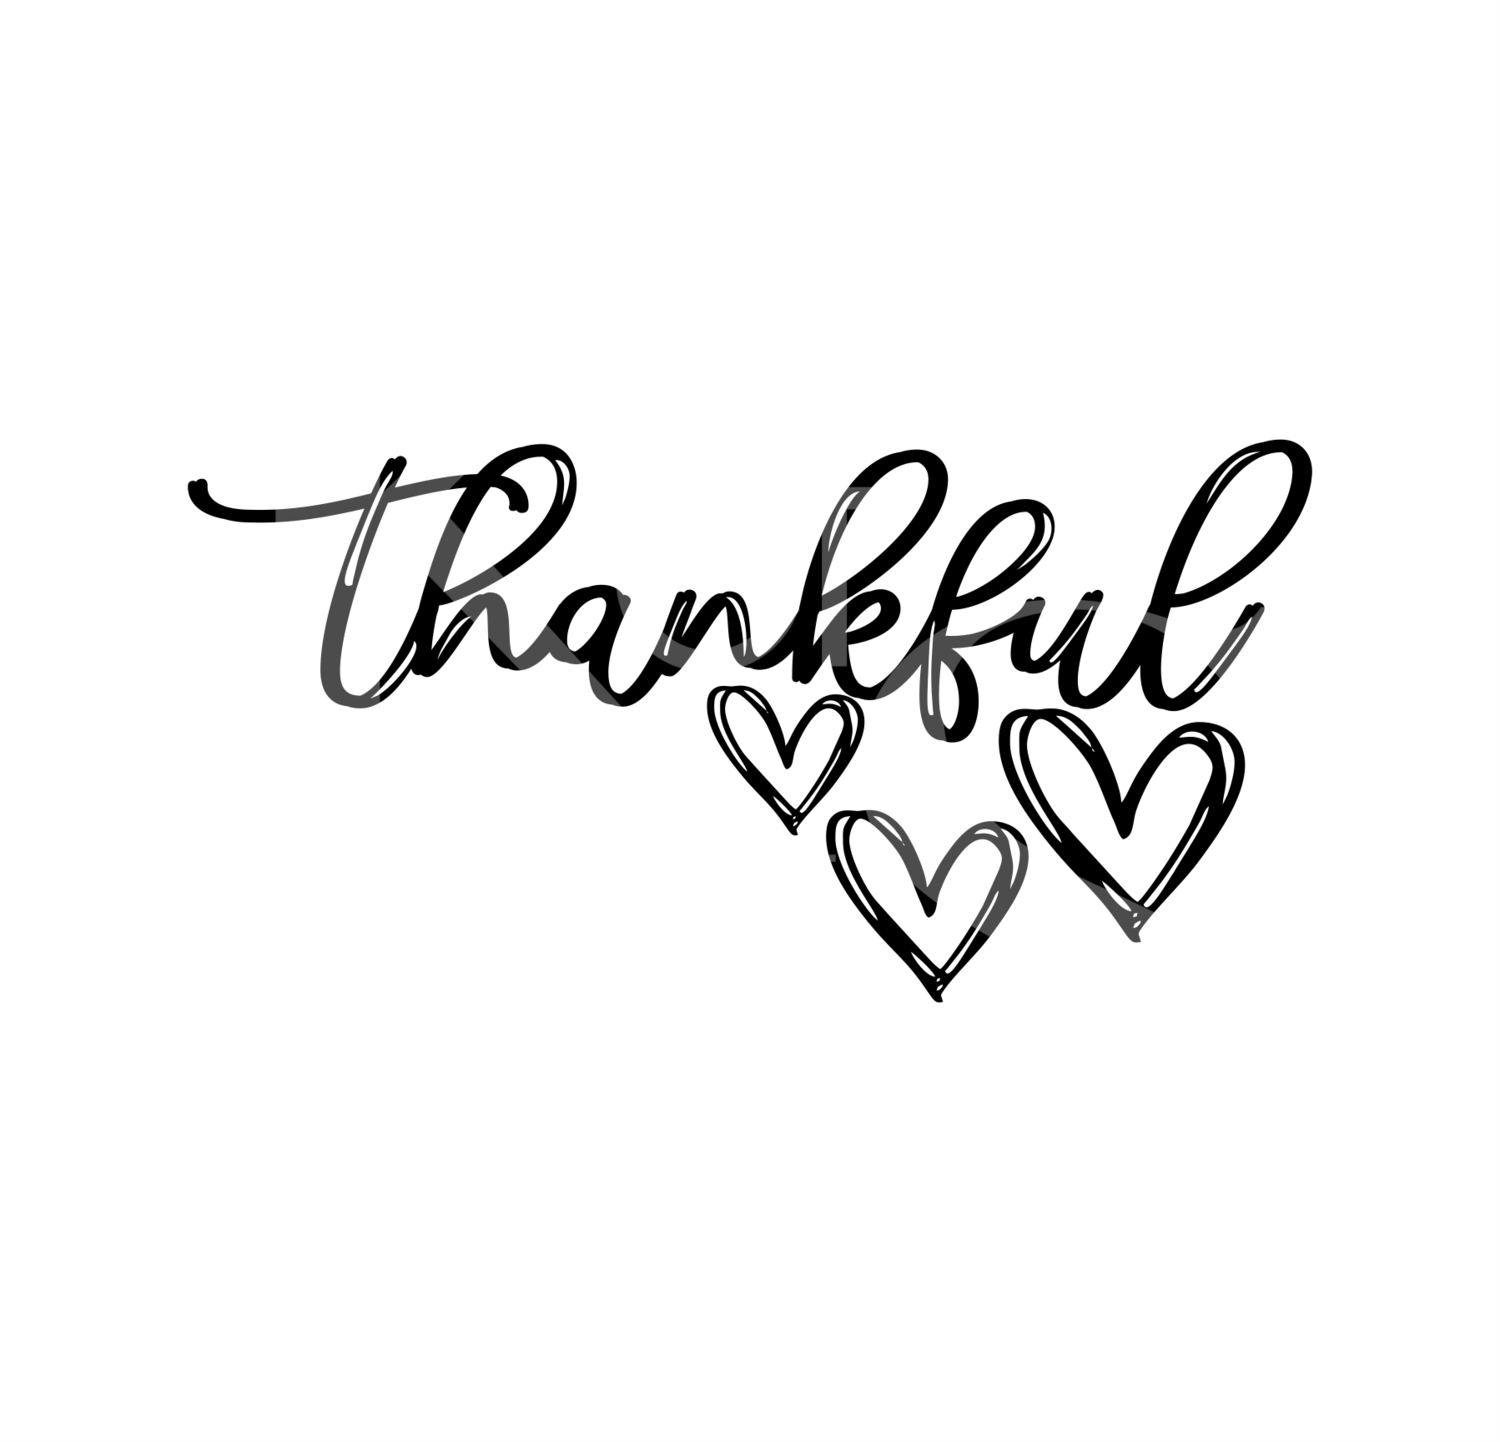 Thankful Only SVG, Hearts SVG, Motivational Quotes Svg, Positive Quotes Svg, Cute Svg, Good Vibes Only Dxf, Cut File for Silhouette, SVG for Cricut